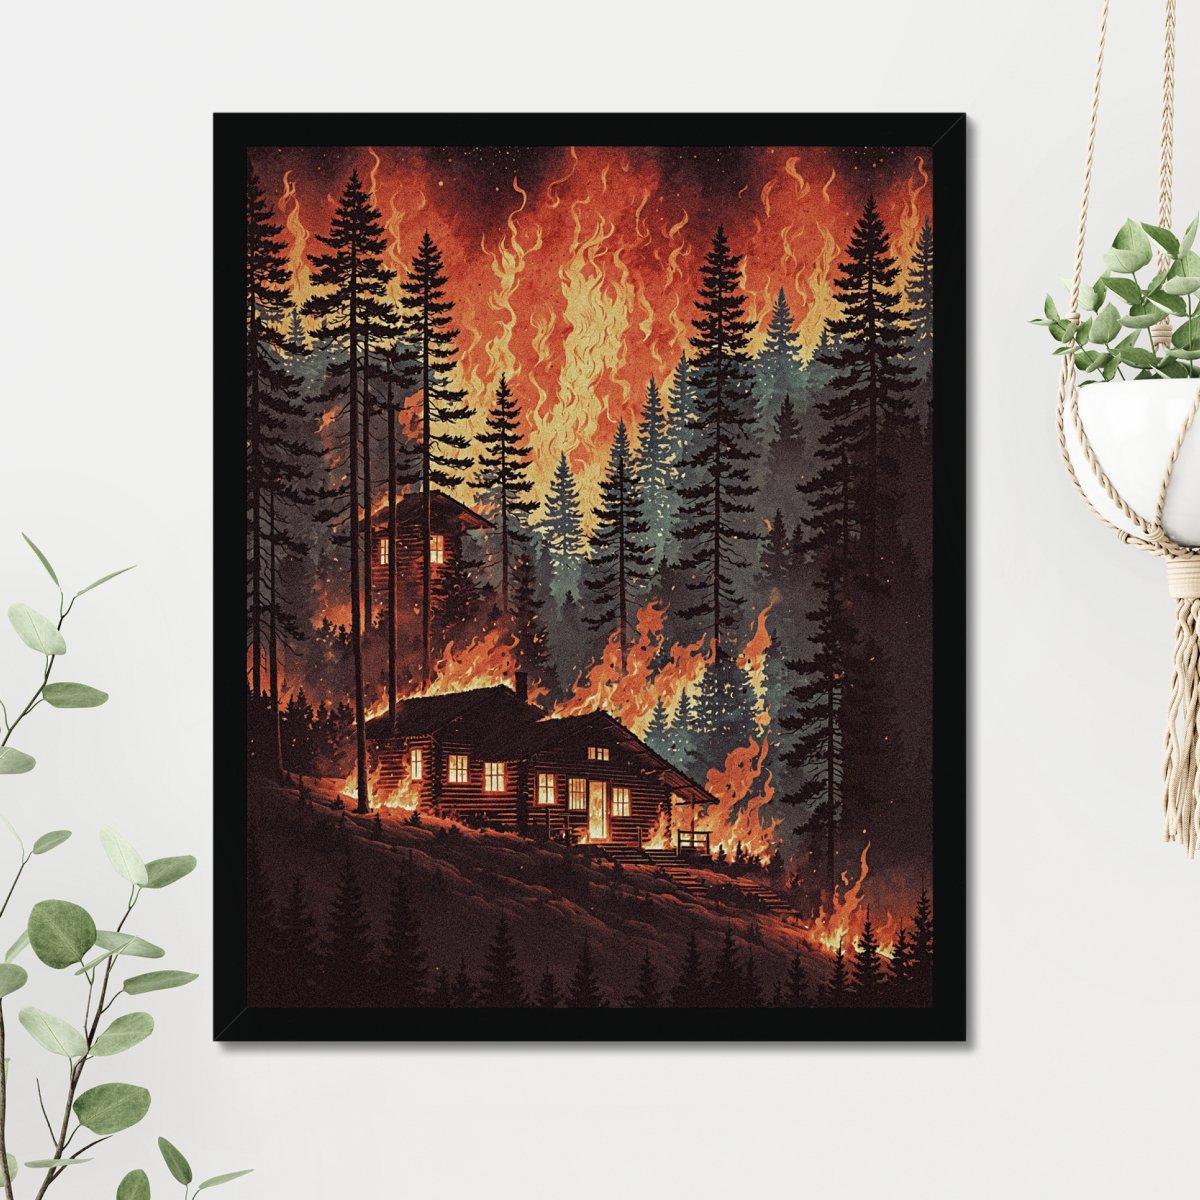 Hellfire - Art print - Poster - Ever colorful